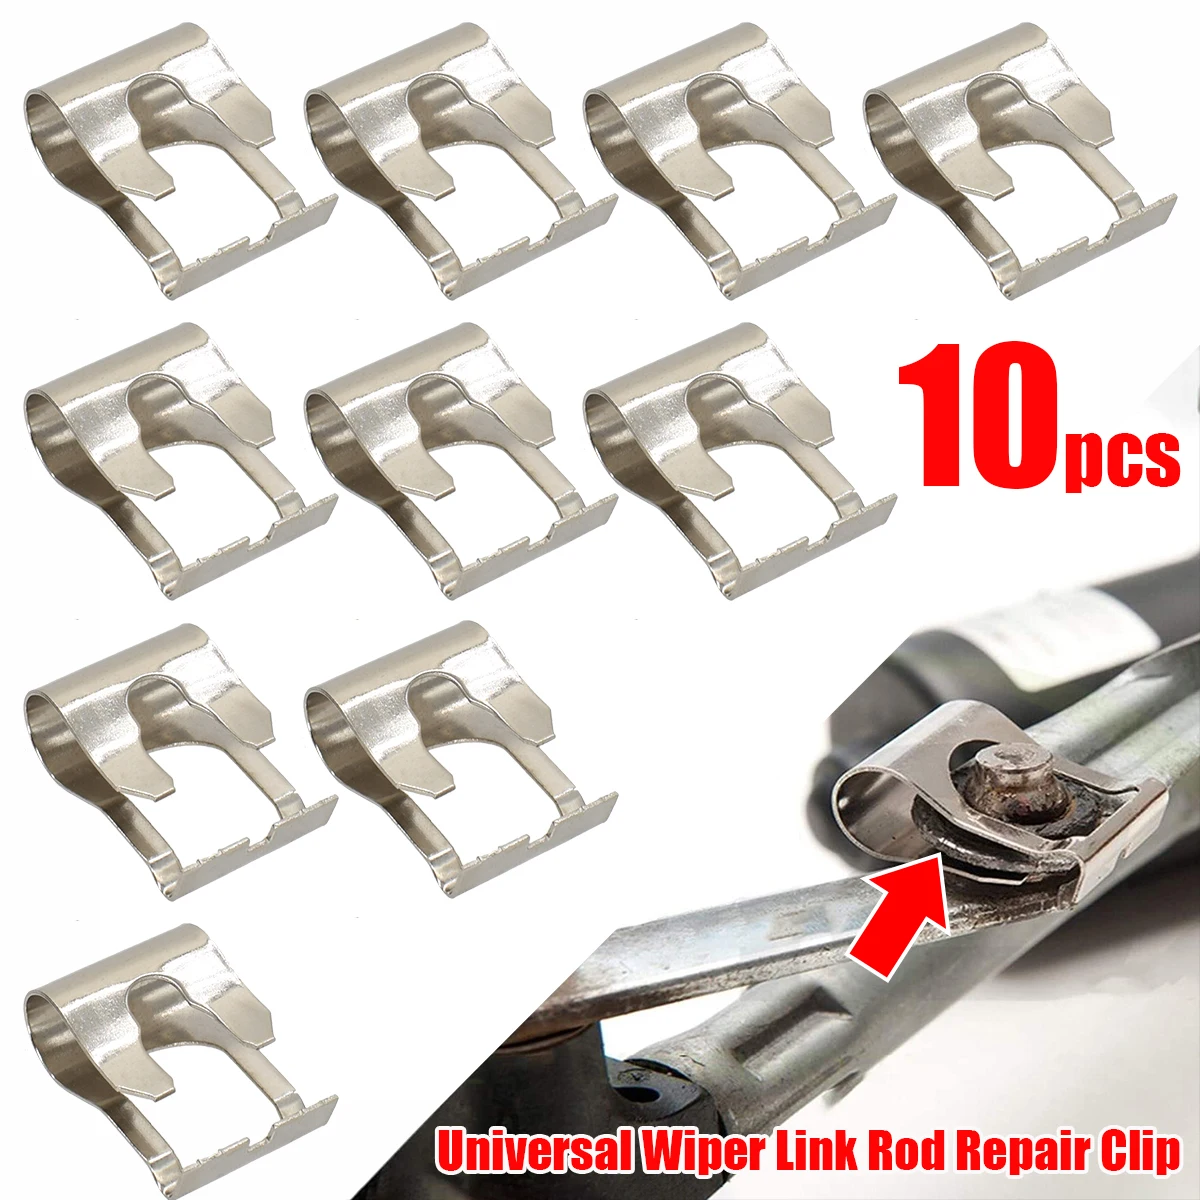 10Pcs Universal Front Windscreen Wiper Link Linkage Rods Repair Clip Spring - 1 YEAR GUARANTEE For VW Toyota Hyundai Ford Opel